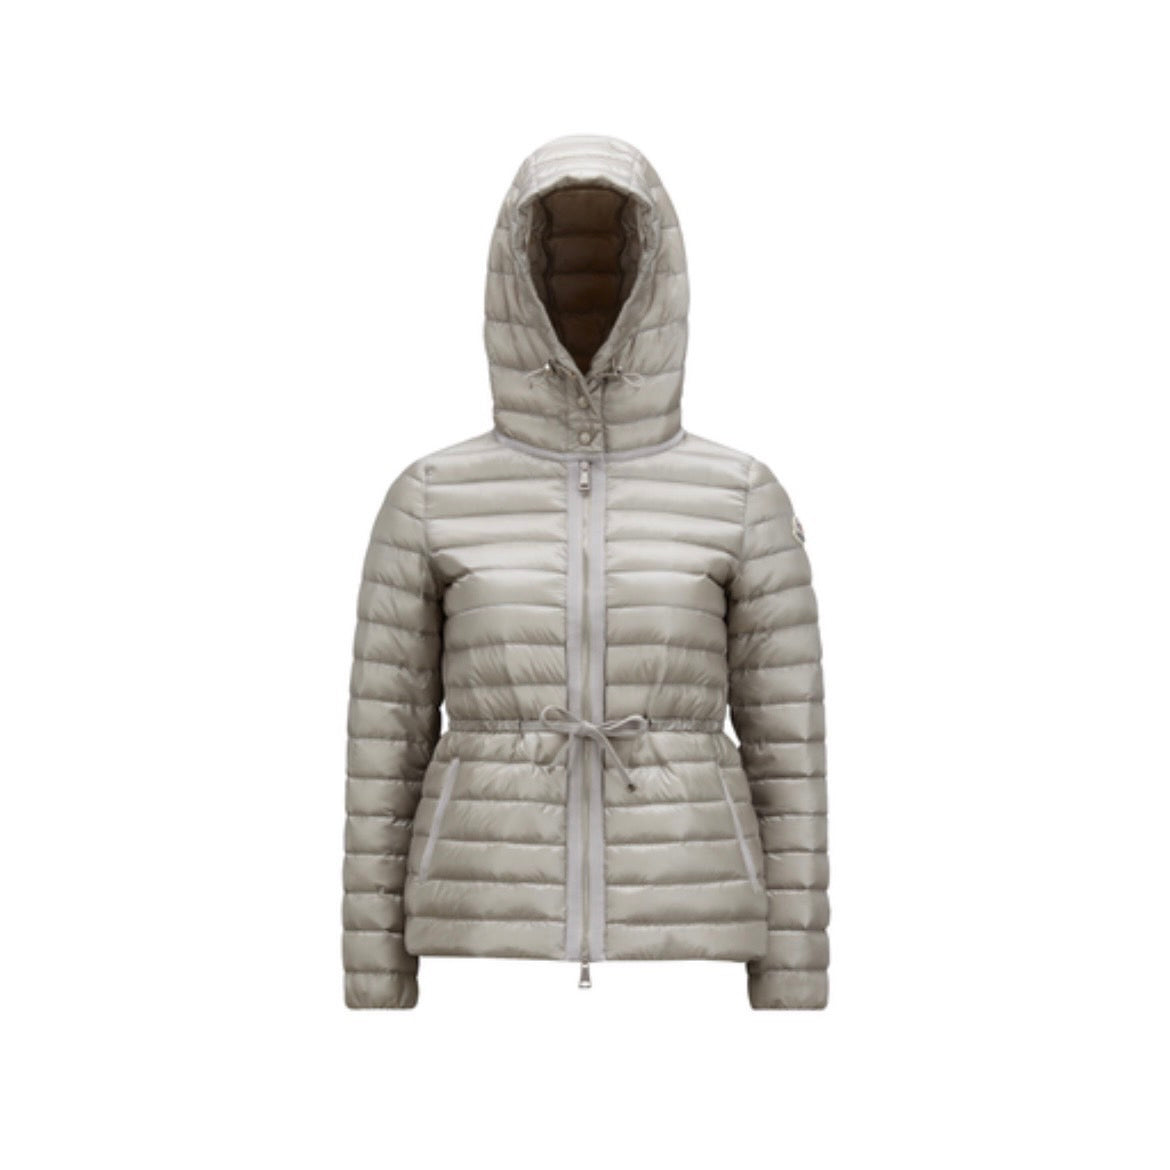 MONCLER NEW ARRIVAL